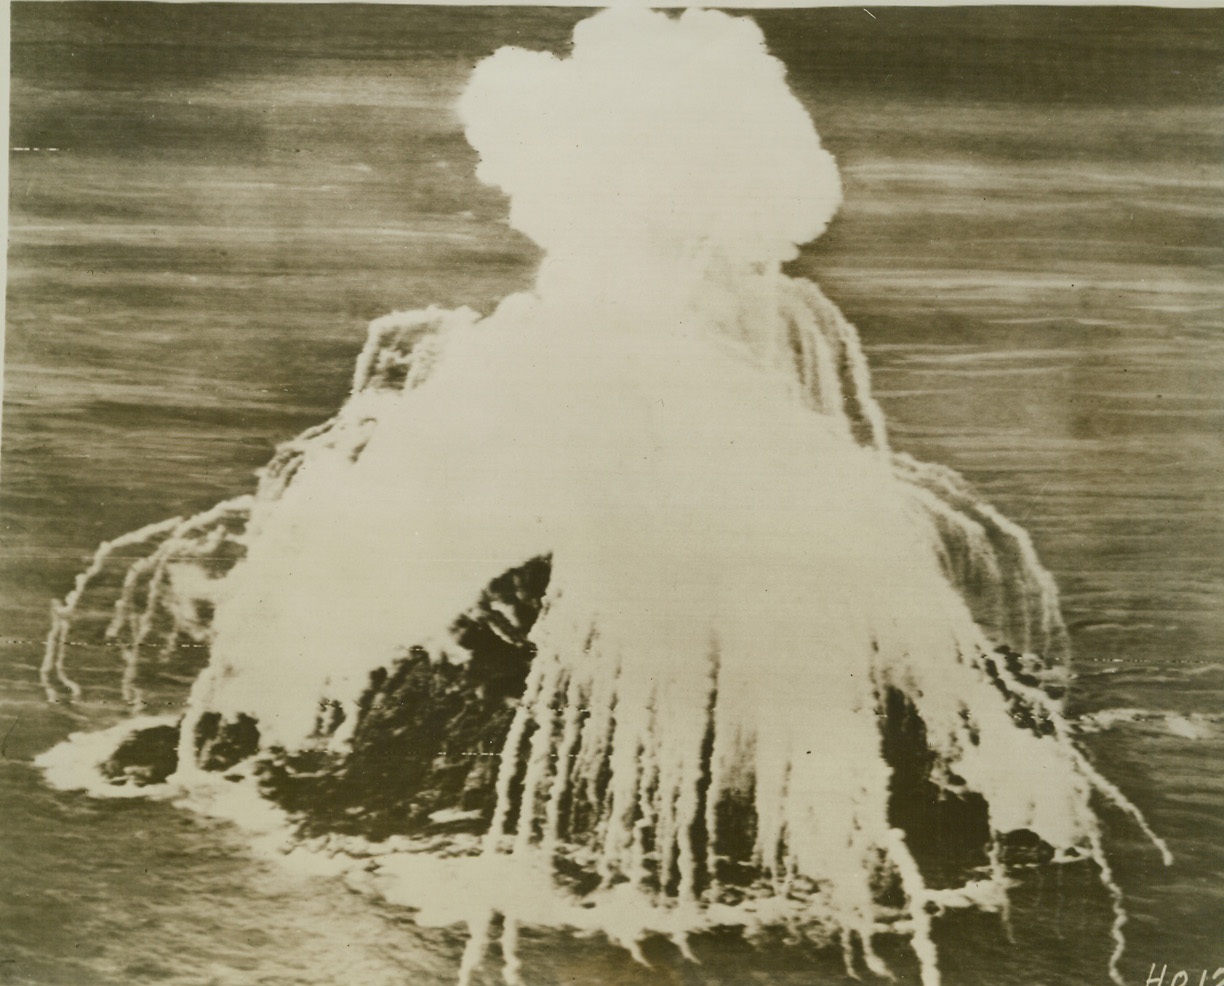 INCENDIARY “SHOWER” FOR JAPS, 5/2/1944. This photo, flashed from Hawaii to the U.S. by radiotelephoto, shows a white phosphorous bomb “shower” from planes of the U.S. Seventh Air Force completely enveloping a small unidentified Jap-occupied island in the central Pacific area. (Note background has been blanked out for security reasons.) Credit: Army radiotelephoto from ACME;